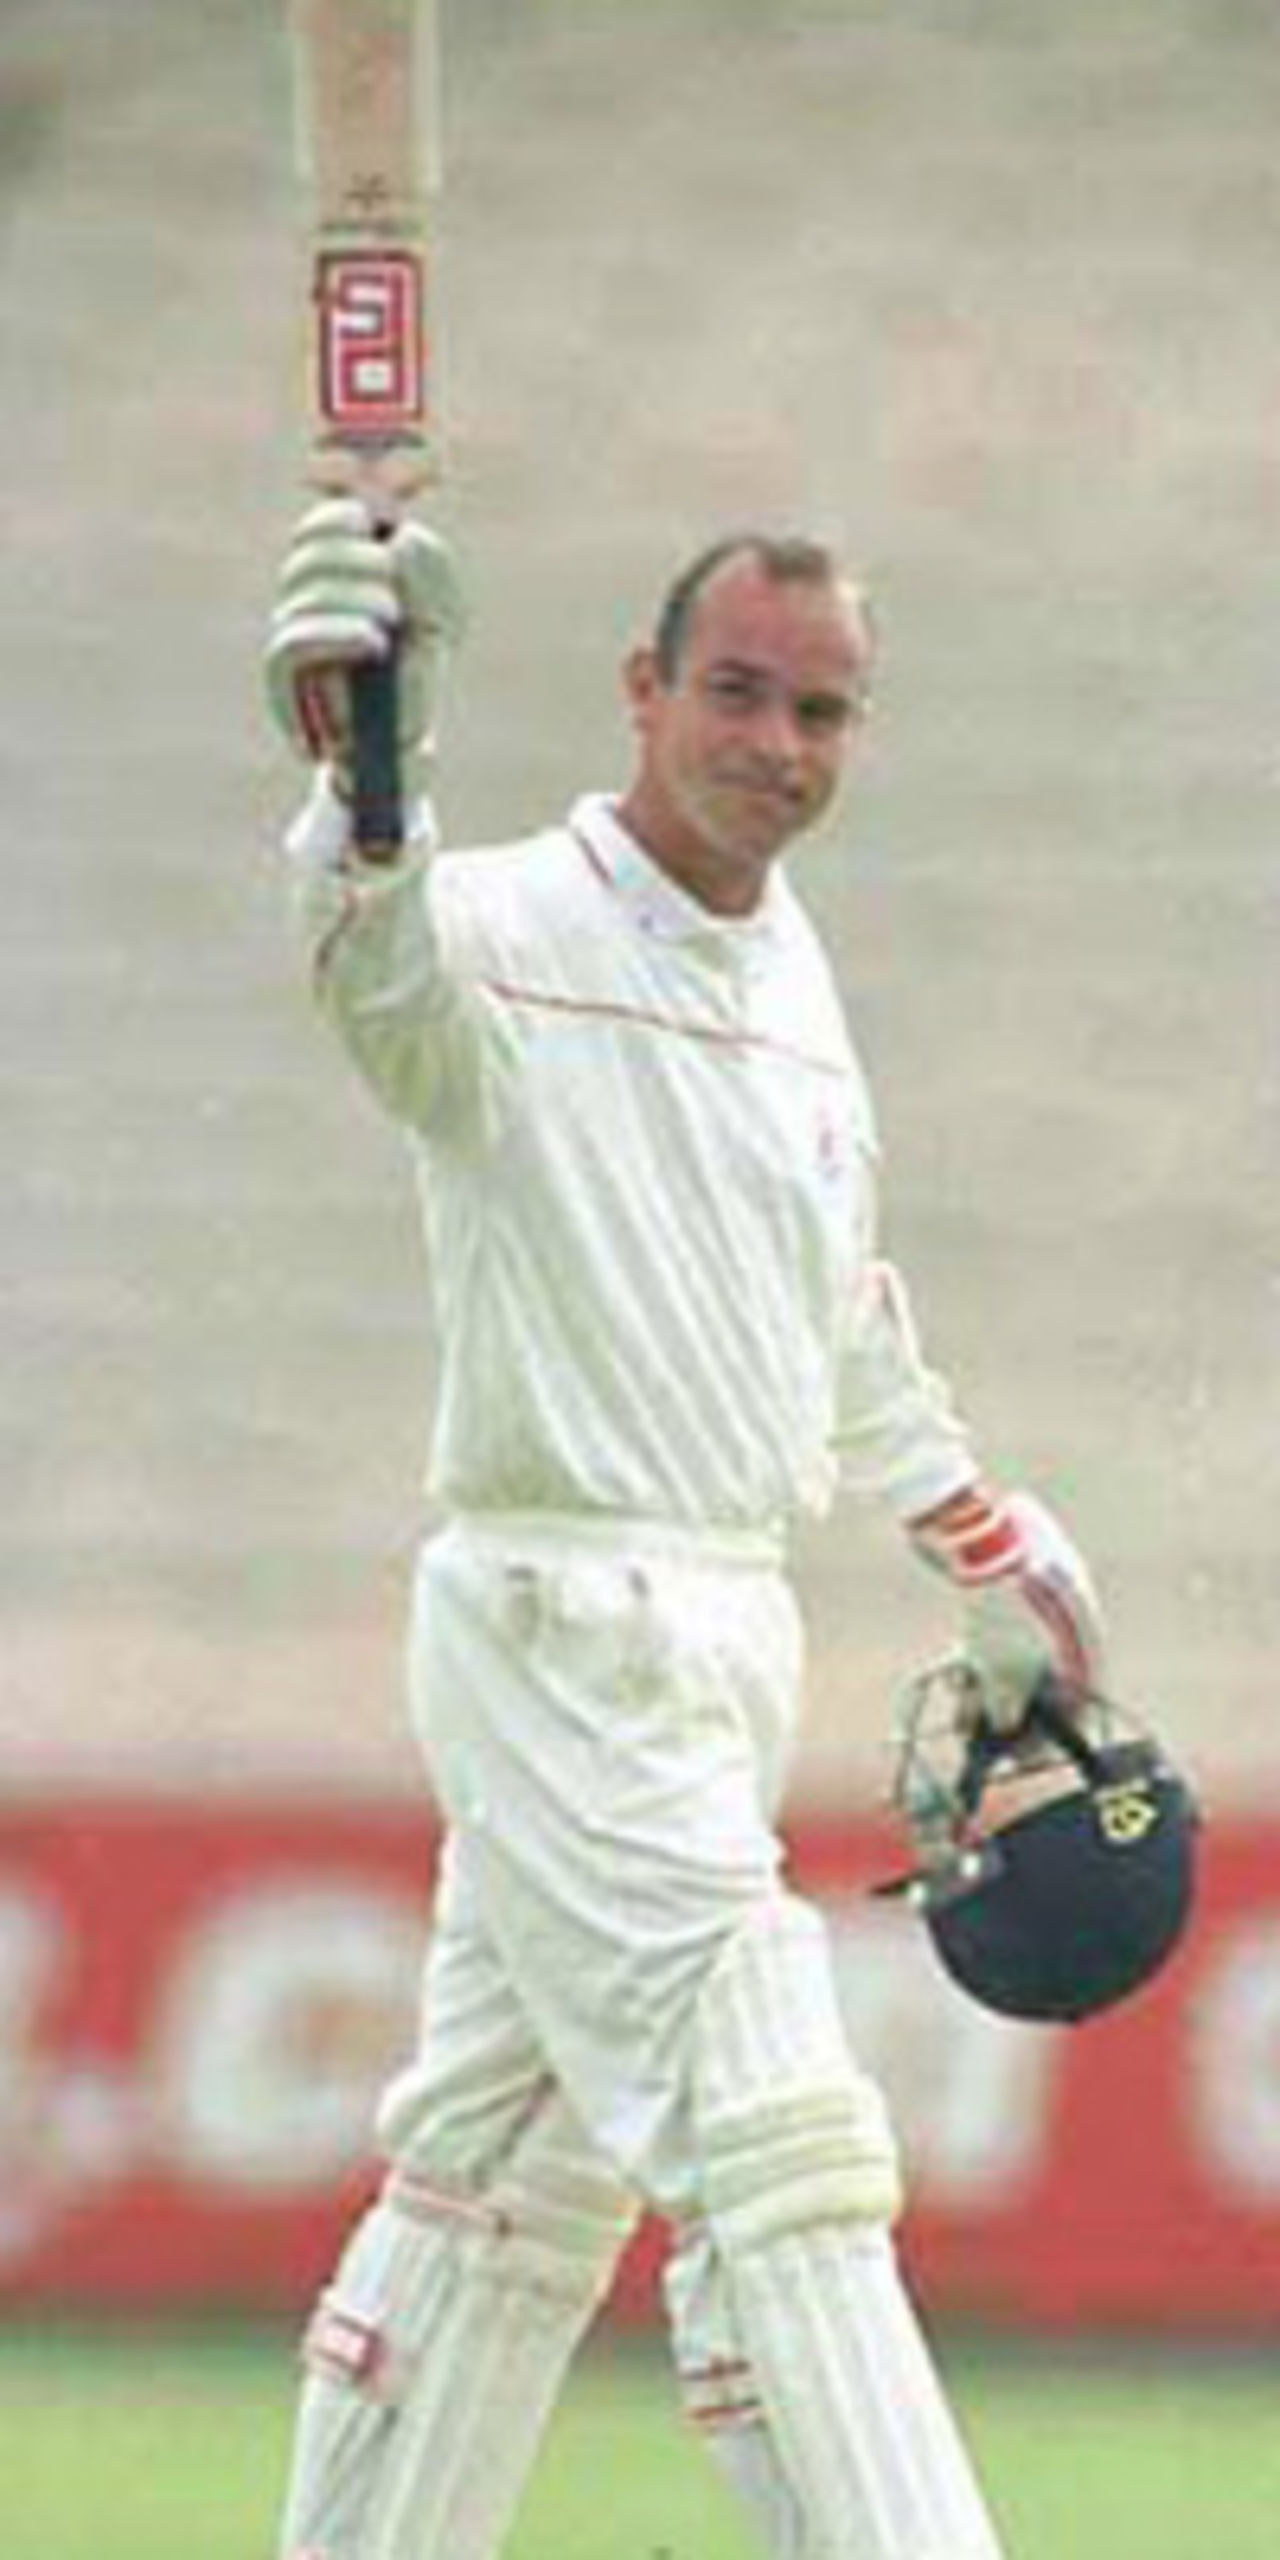 Graham Lloyd raises his bat after scoring century, PPP healthcare County Championship Division One, 2000, Lancashire v Somerset, Old Trafford, Manchester, 08-10 September 2000 (Day 2).